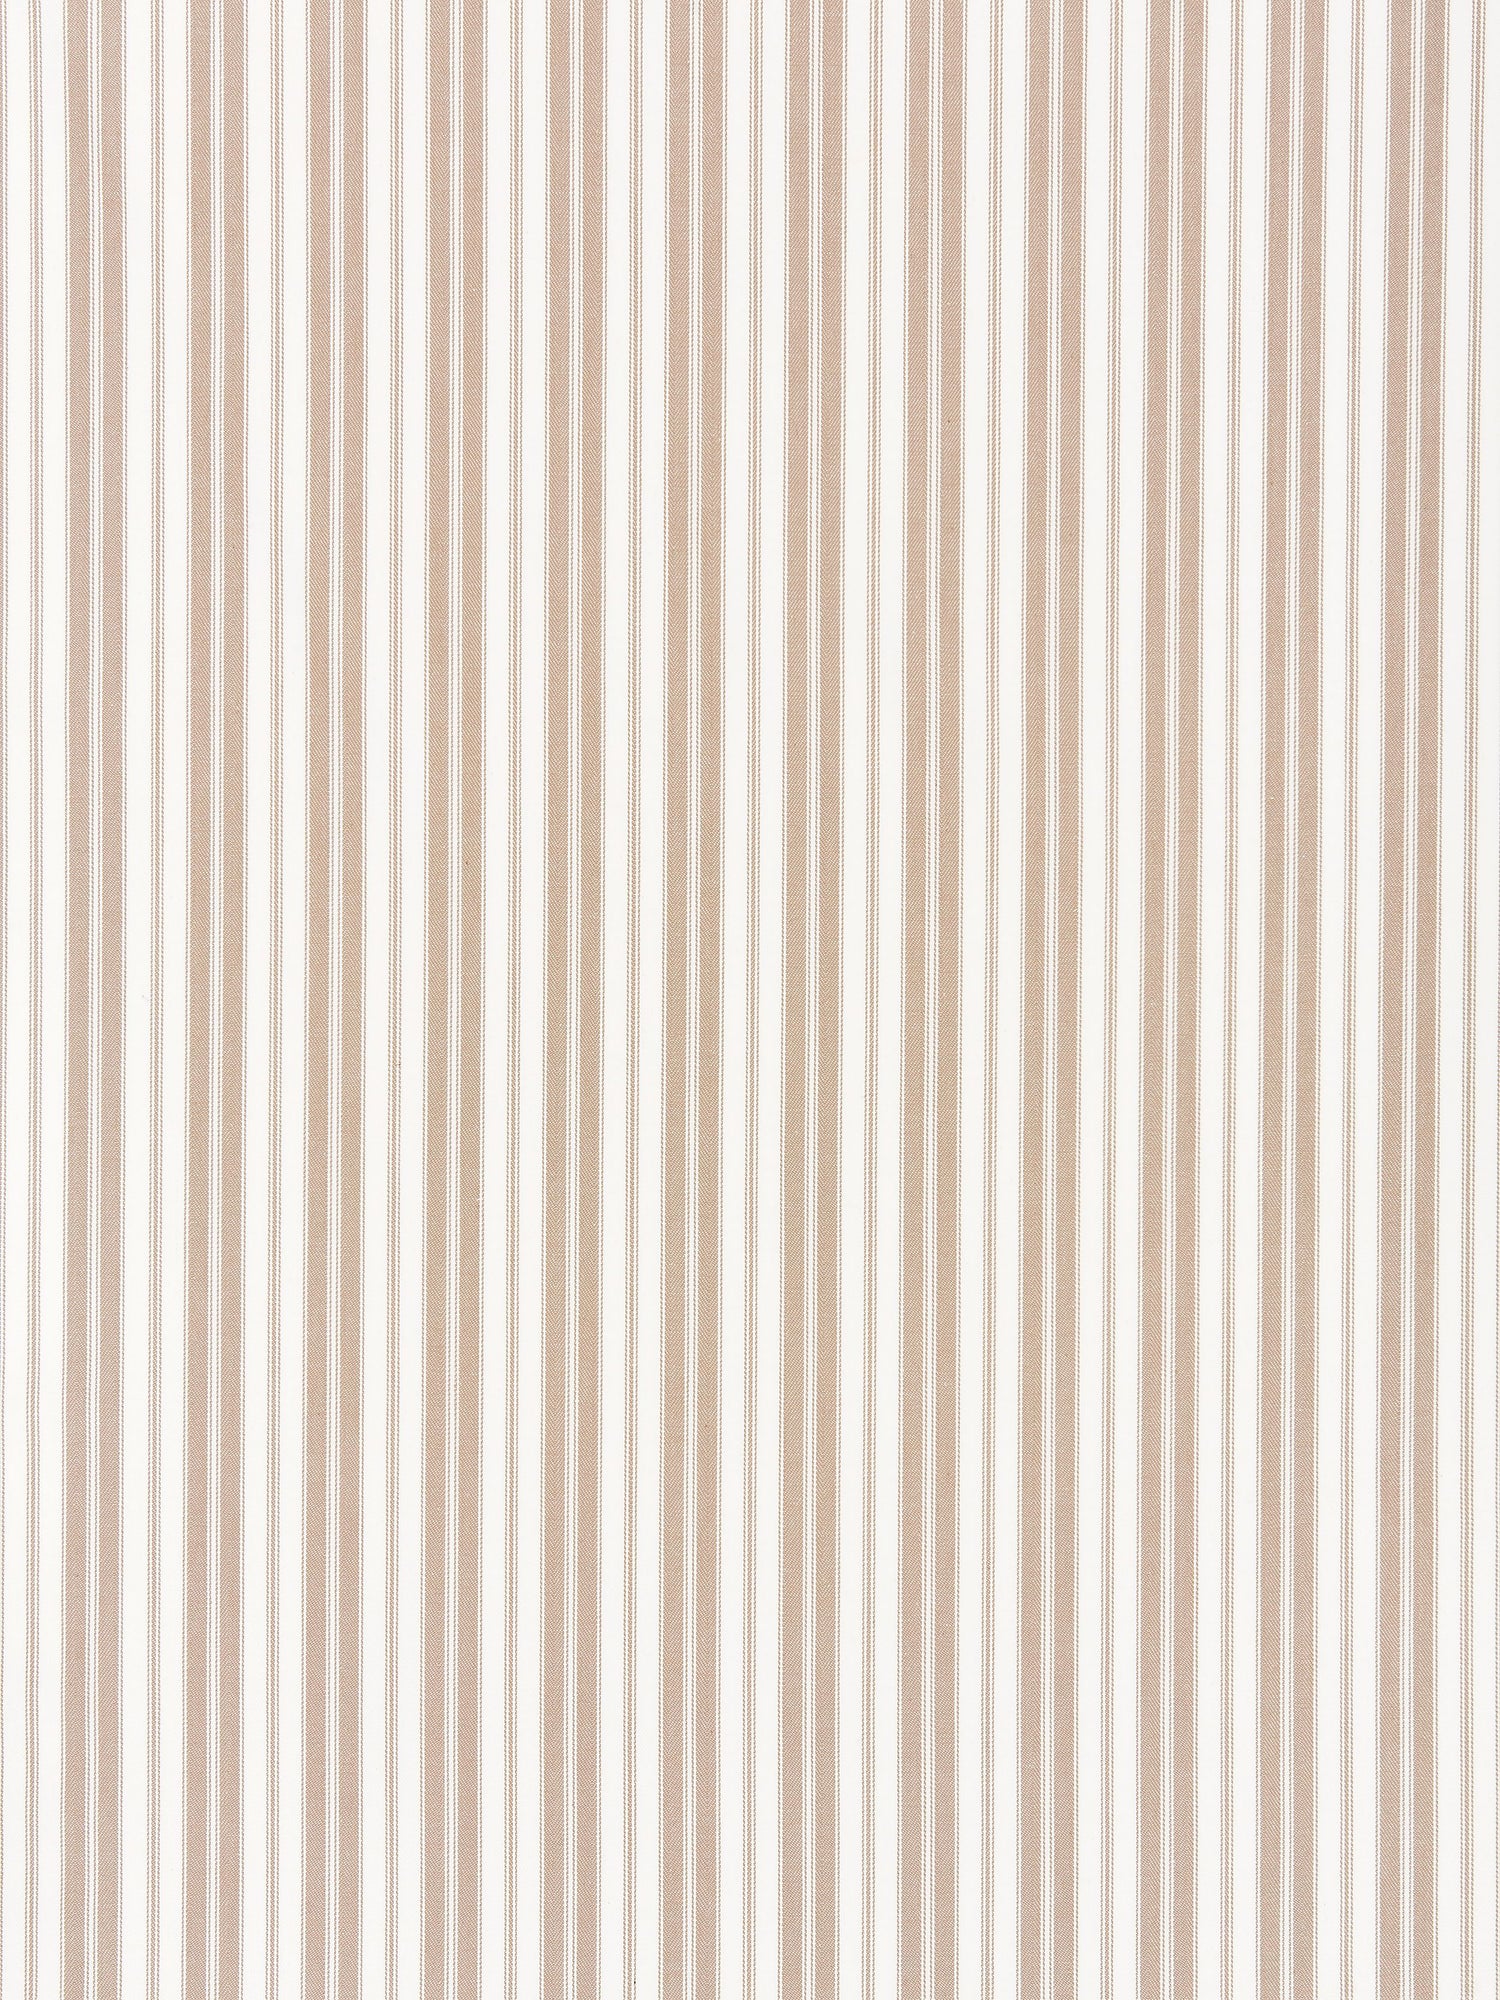 Devon Ticking Stripe fabric in linen color - pattern number SC 000127115 - by Scalamandre in the Scalamandre Fabrics Book 1 collection